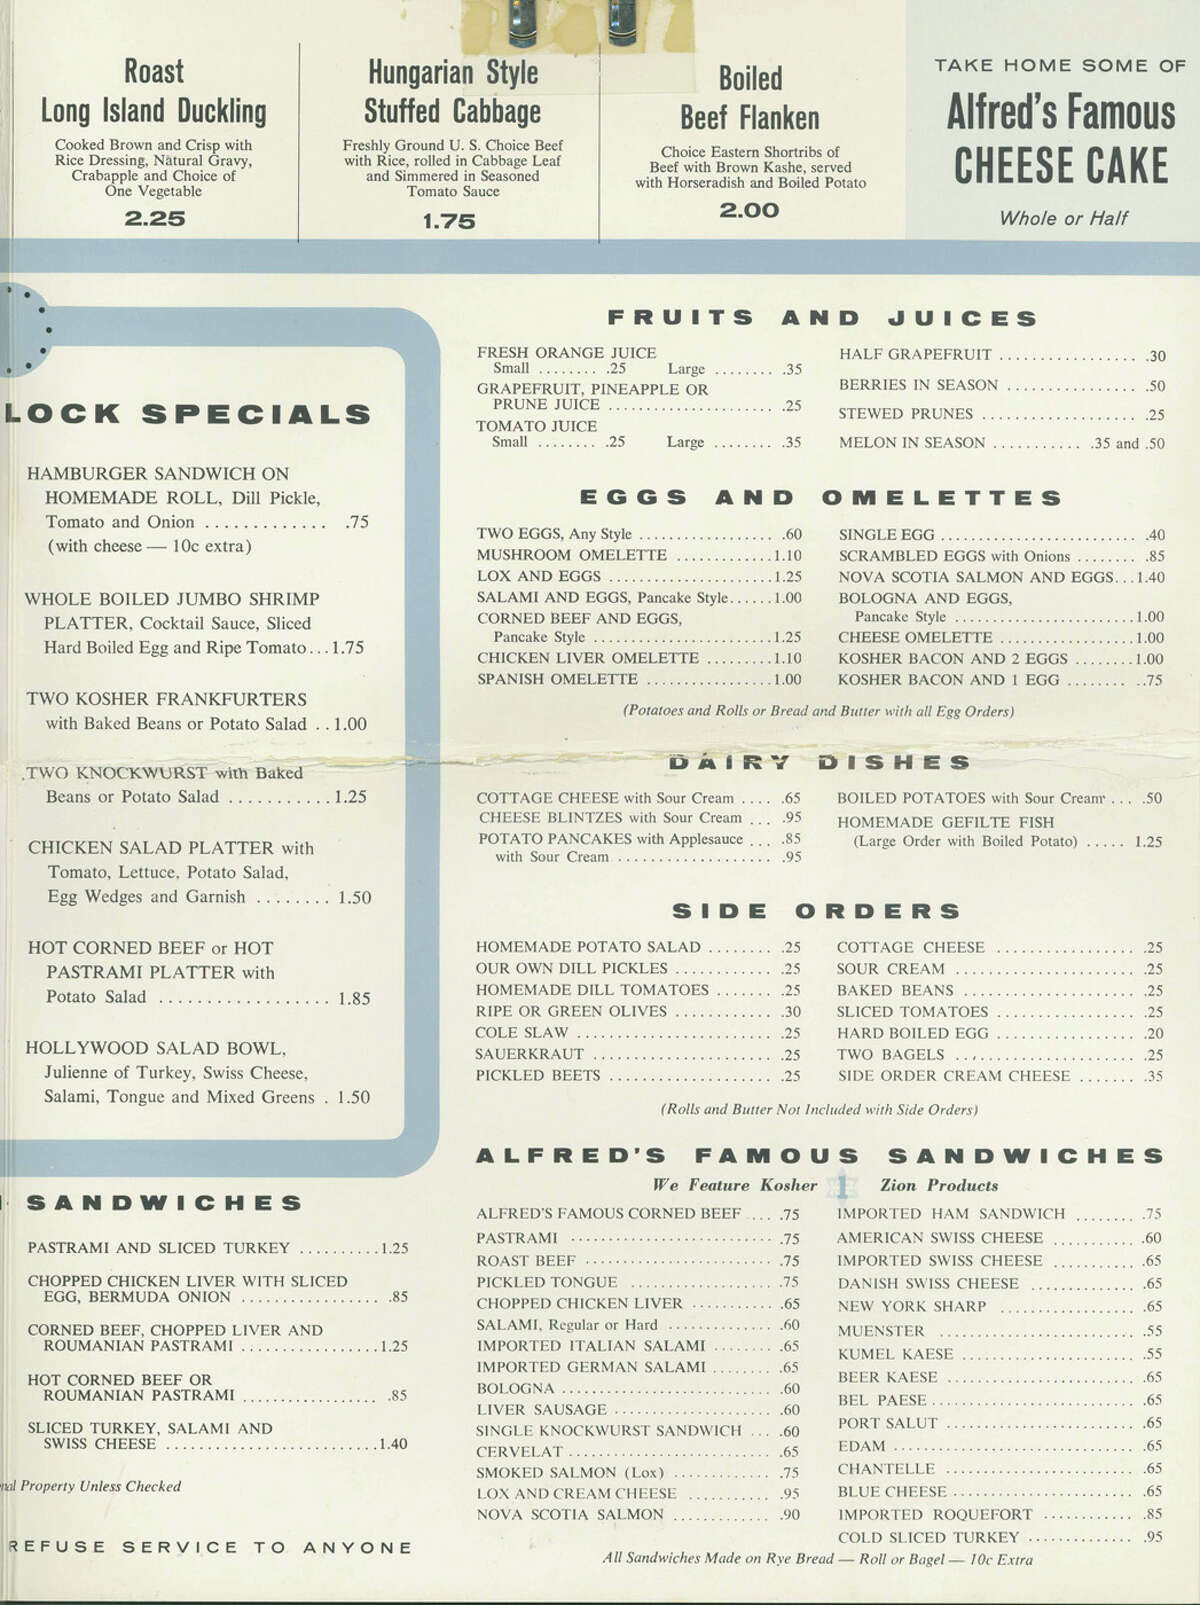 This was a sprawling menu seen by customers at the old Alfred's chain in Houston.    Vintage Houston restaurant menu courtesy University of Houston Conrad N. Hilton College of Hotel and Restaurant Management.